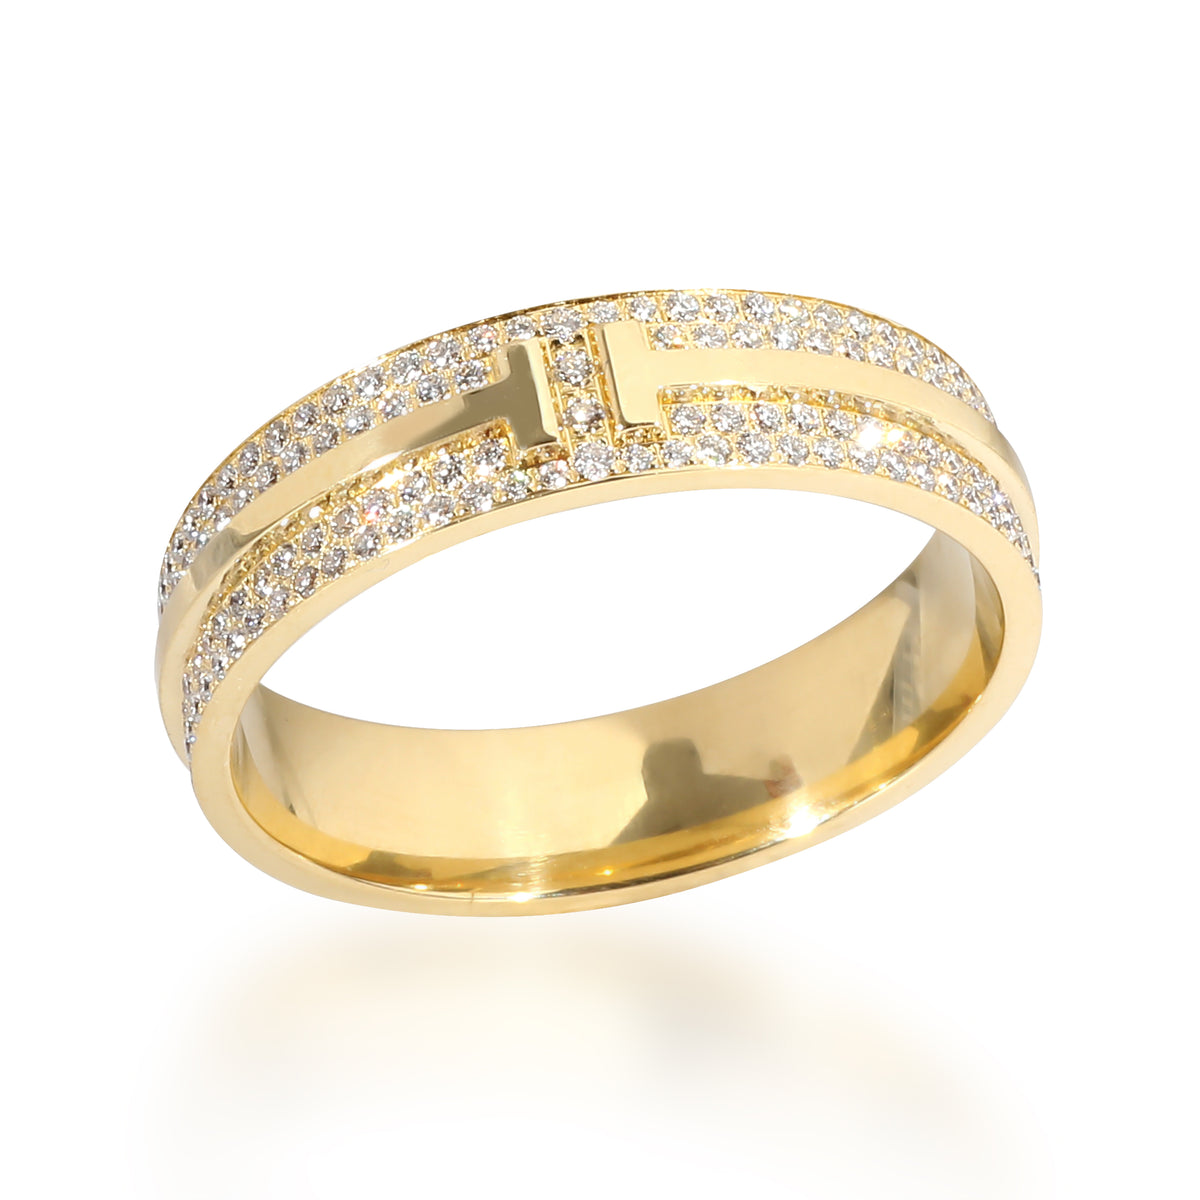 Tiffany & Co. T Wide Pave Diamond Ring in 18k Yellow Gold 0.73 CTW